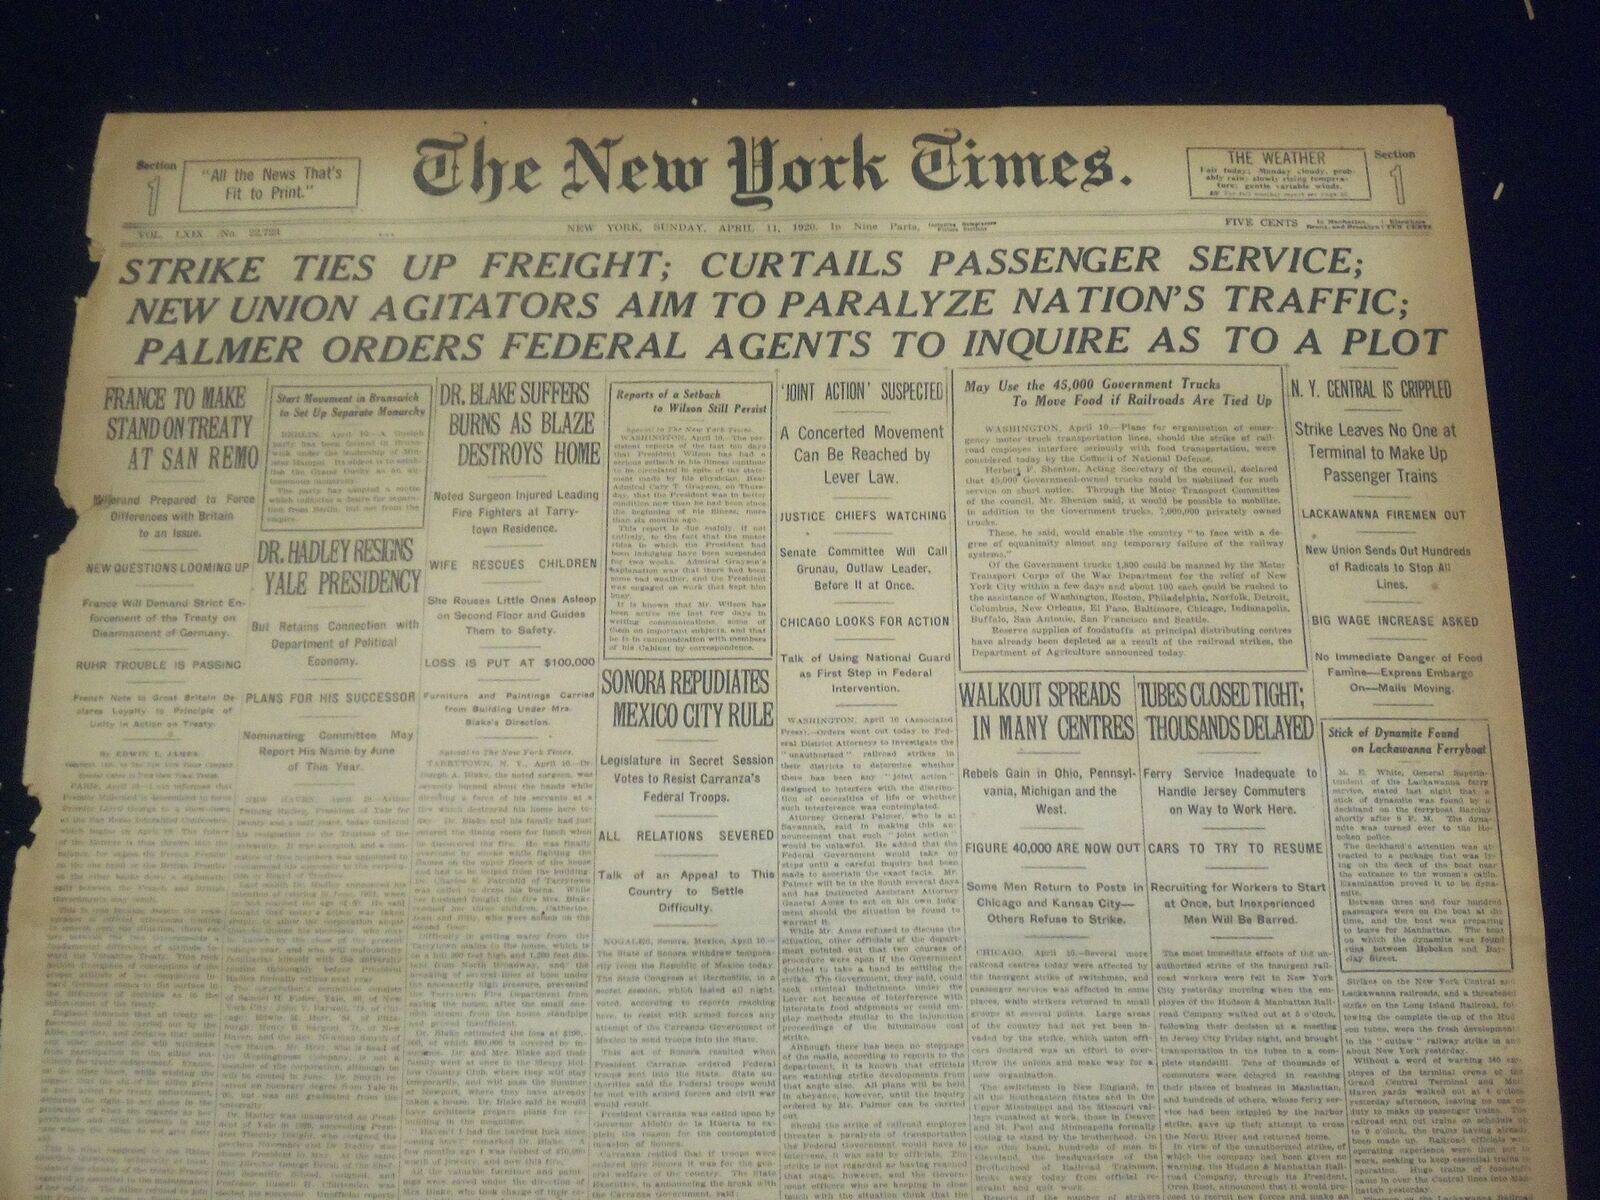 1920 APRIL 11 NEW YORK TIMES - STRIKE TIES UP FREIGHT - NT 8288